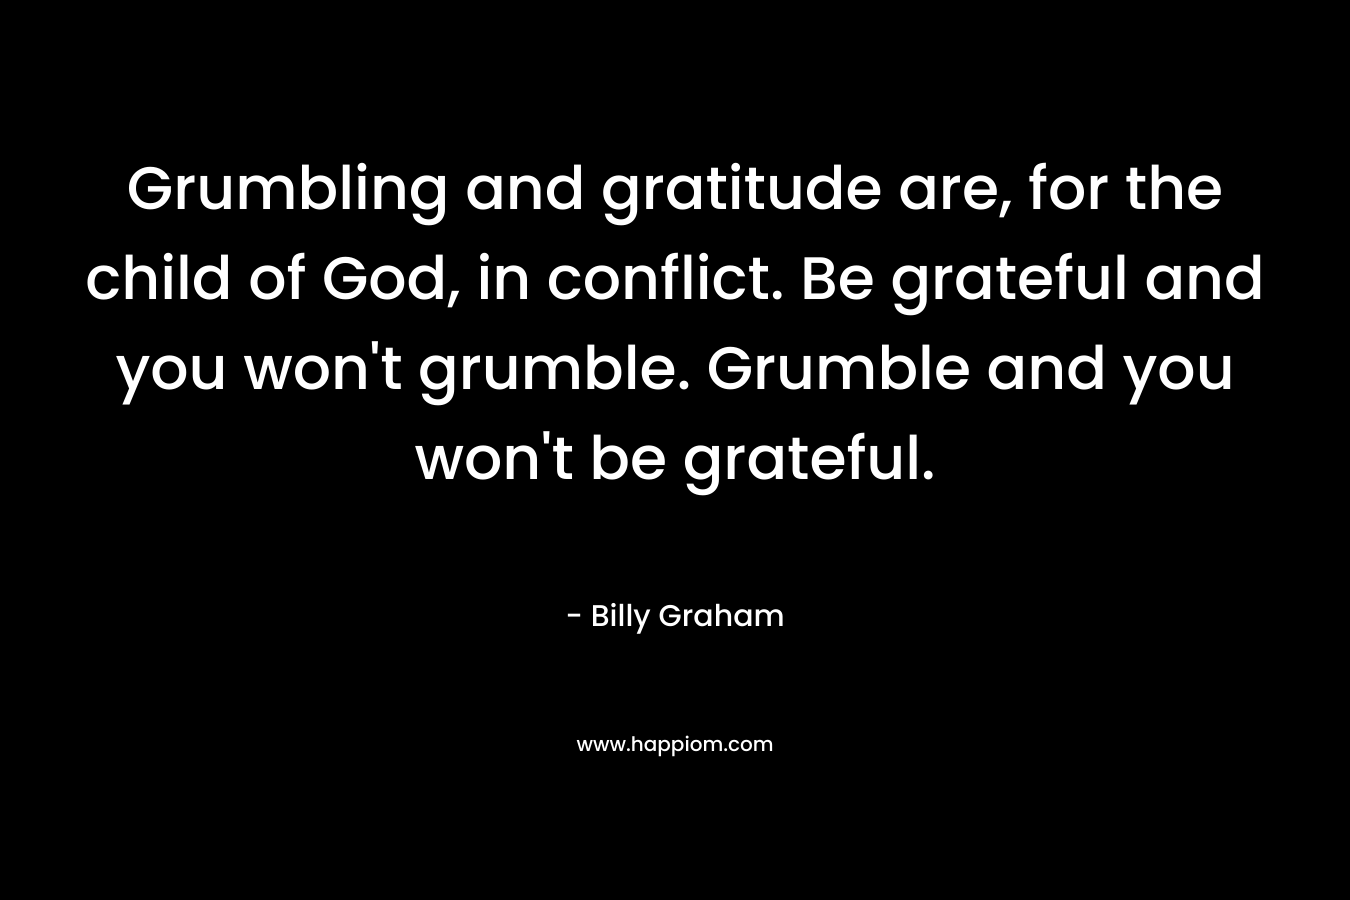 Grumbling and gratitude are, for the child of God, in conflict. Be grateful and you won't grumble. Grumble and you won't be grateful.